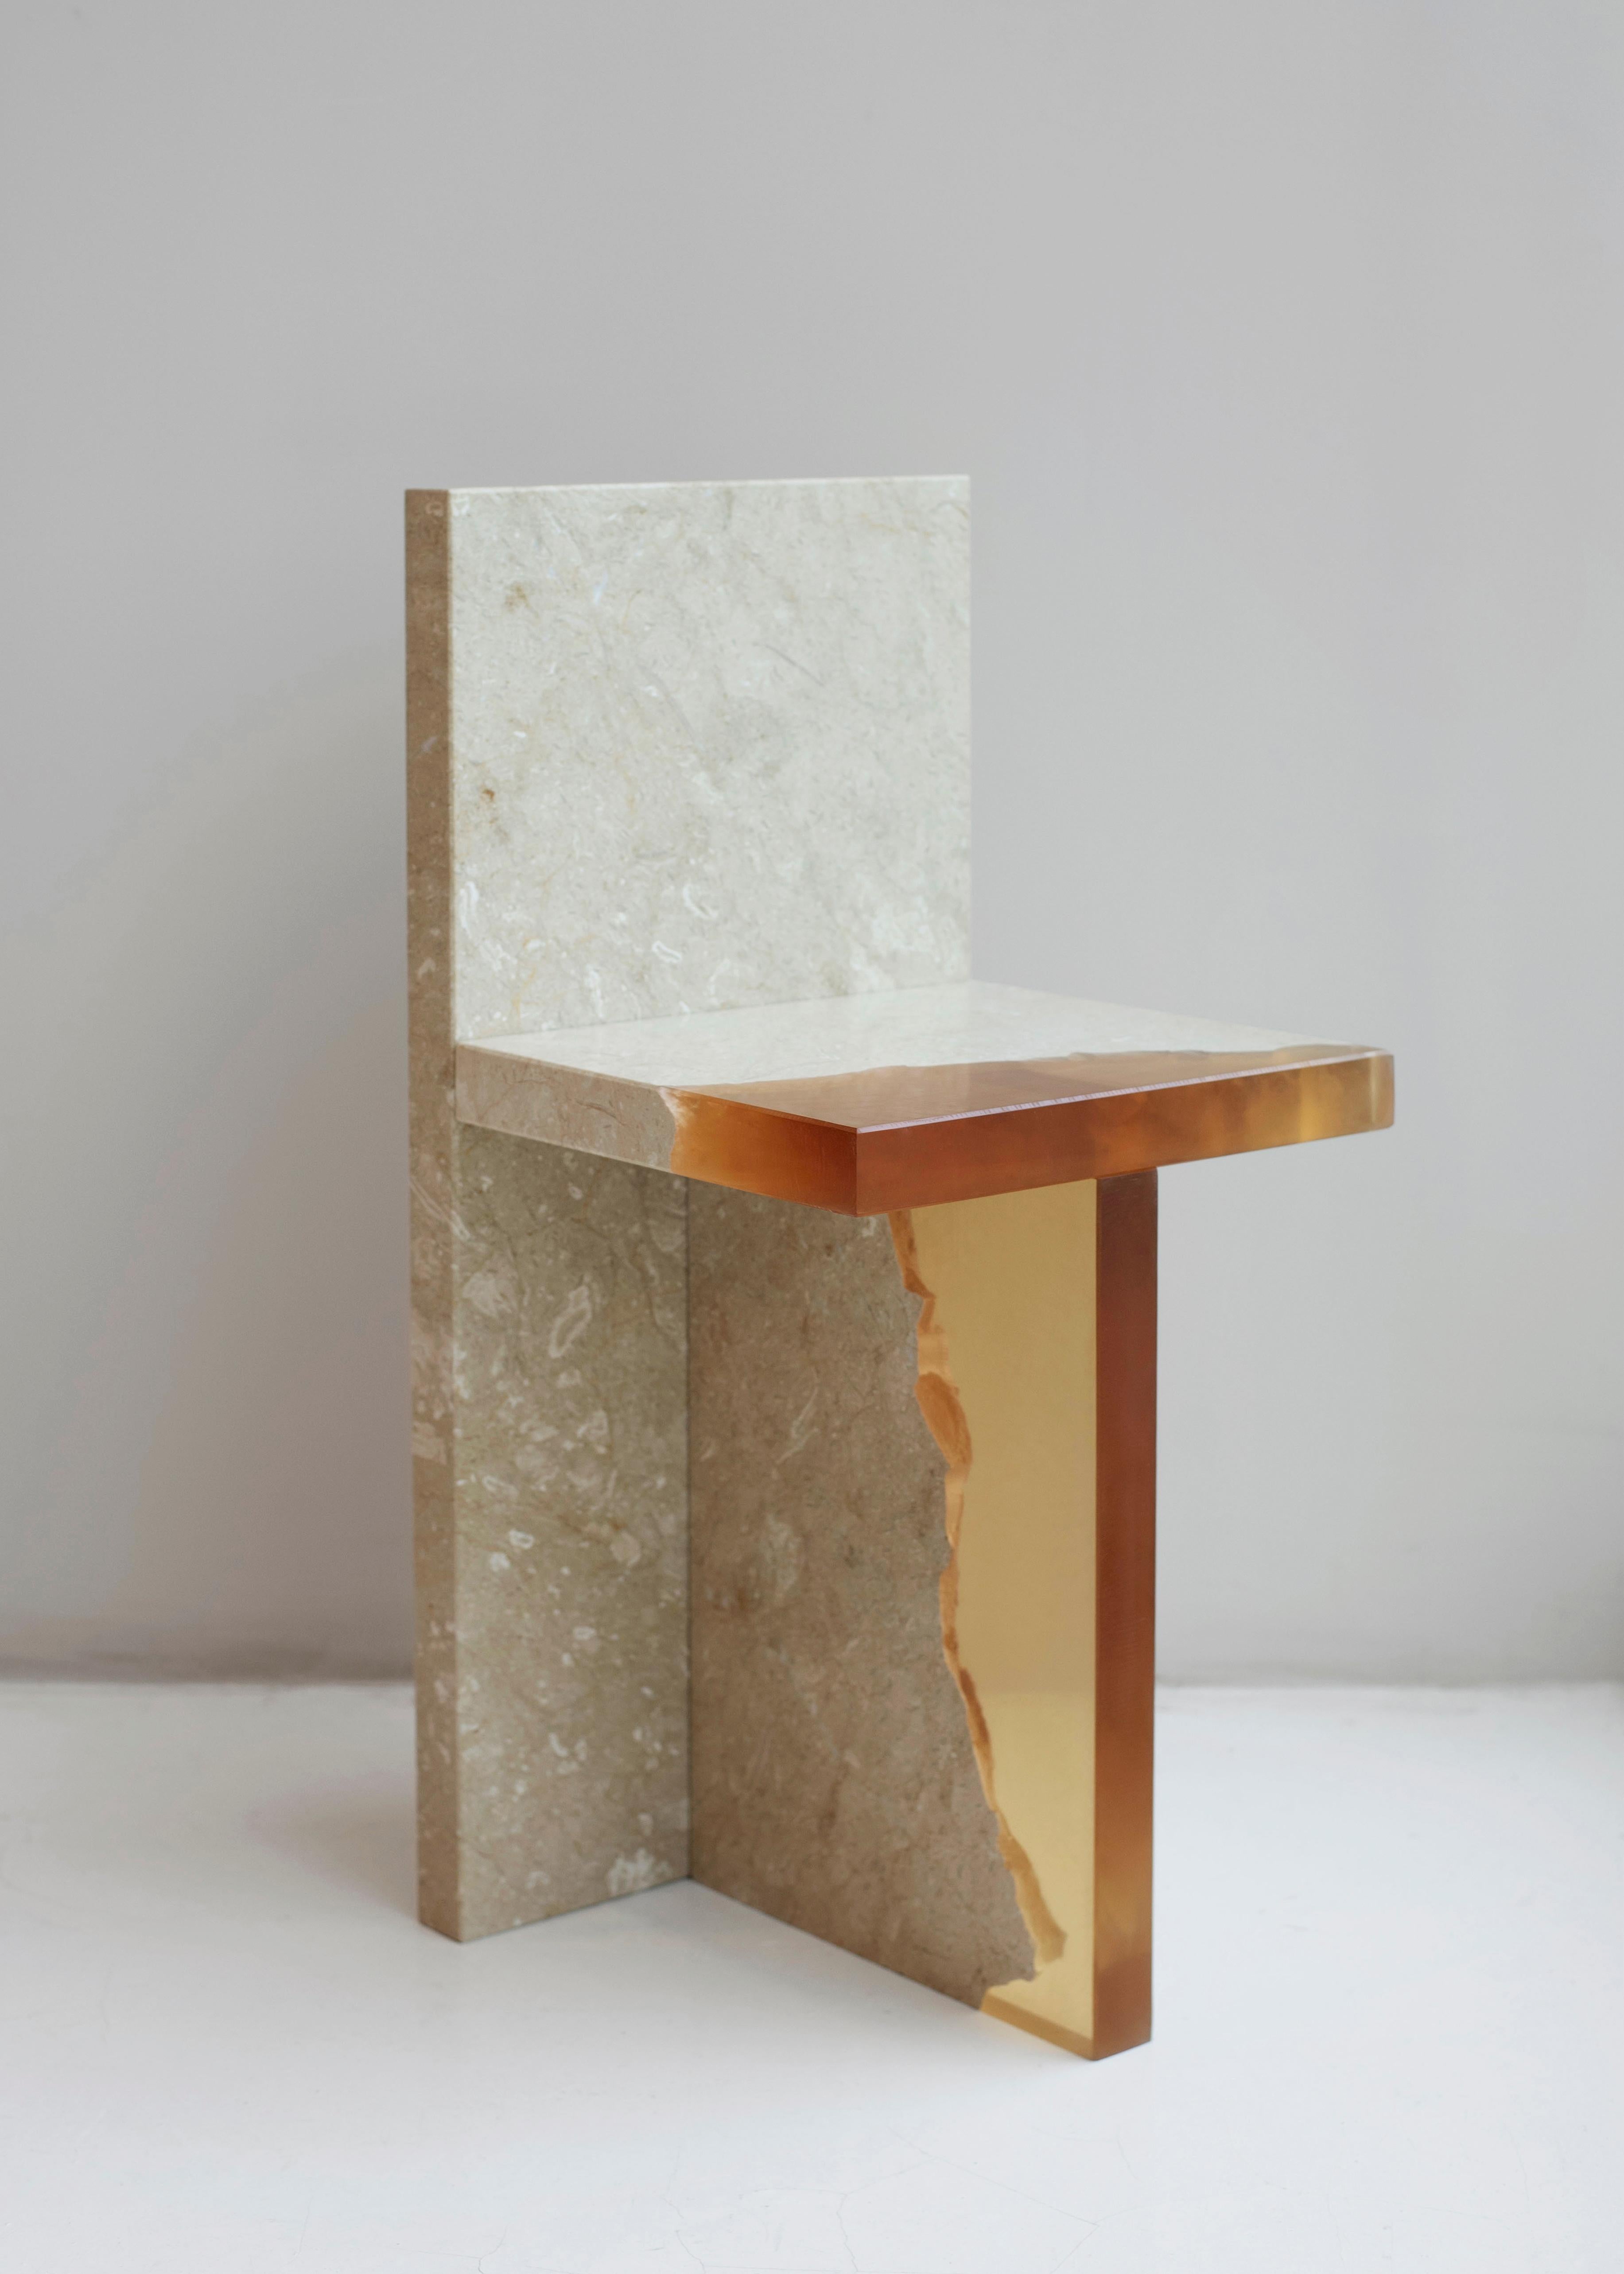 Crystal marble fragment chair by Jang Hea Kyoung
Artist: Jang Hea Kyoung
Materials: Crystal resin and marble
Dimensions: 33 x 34 x 74 cm

Jang Hea Kyoung is based in Seoul, Republic of Korea. She searches for craft elements and makes modern